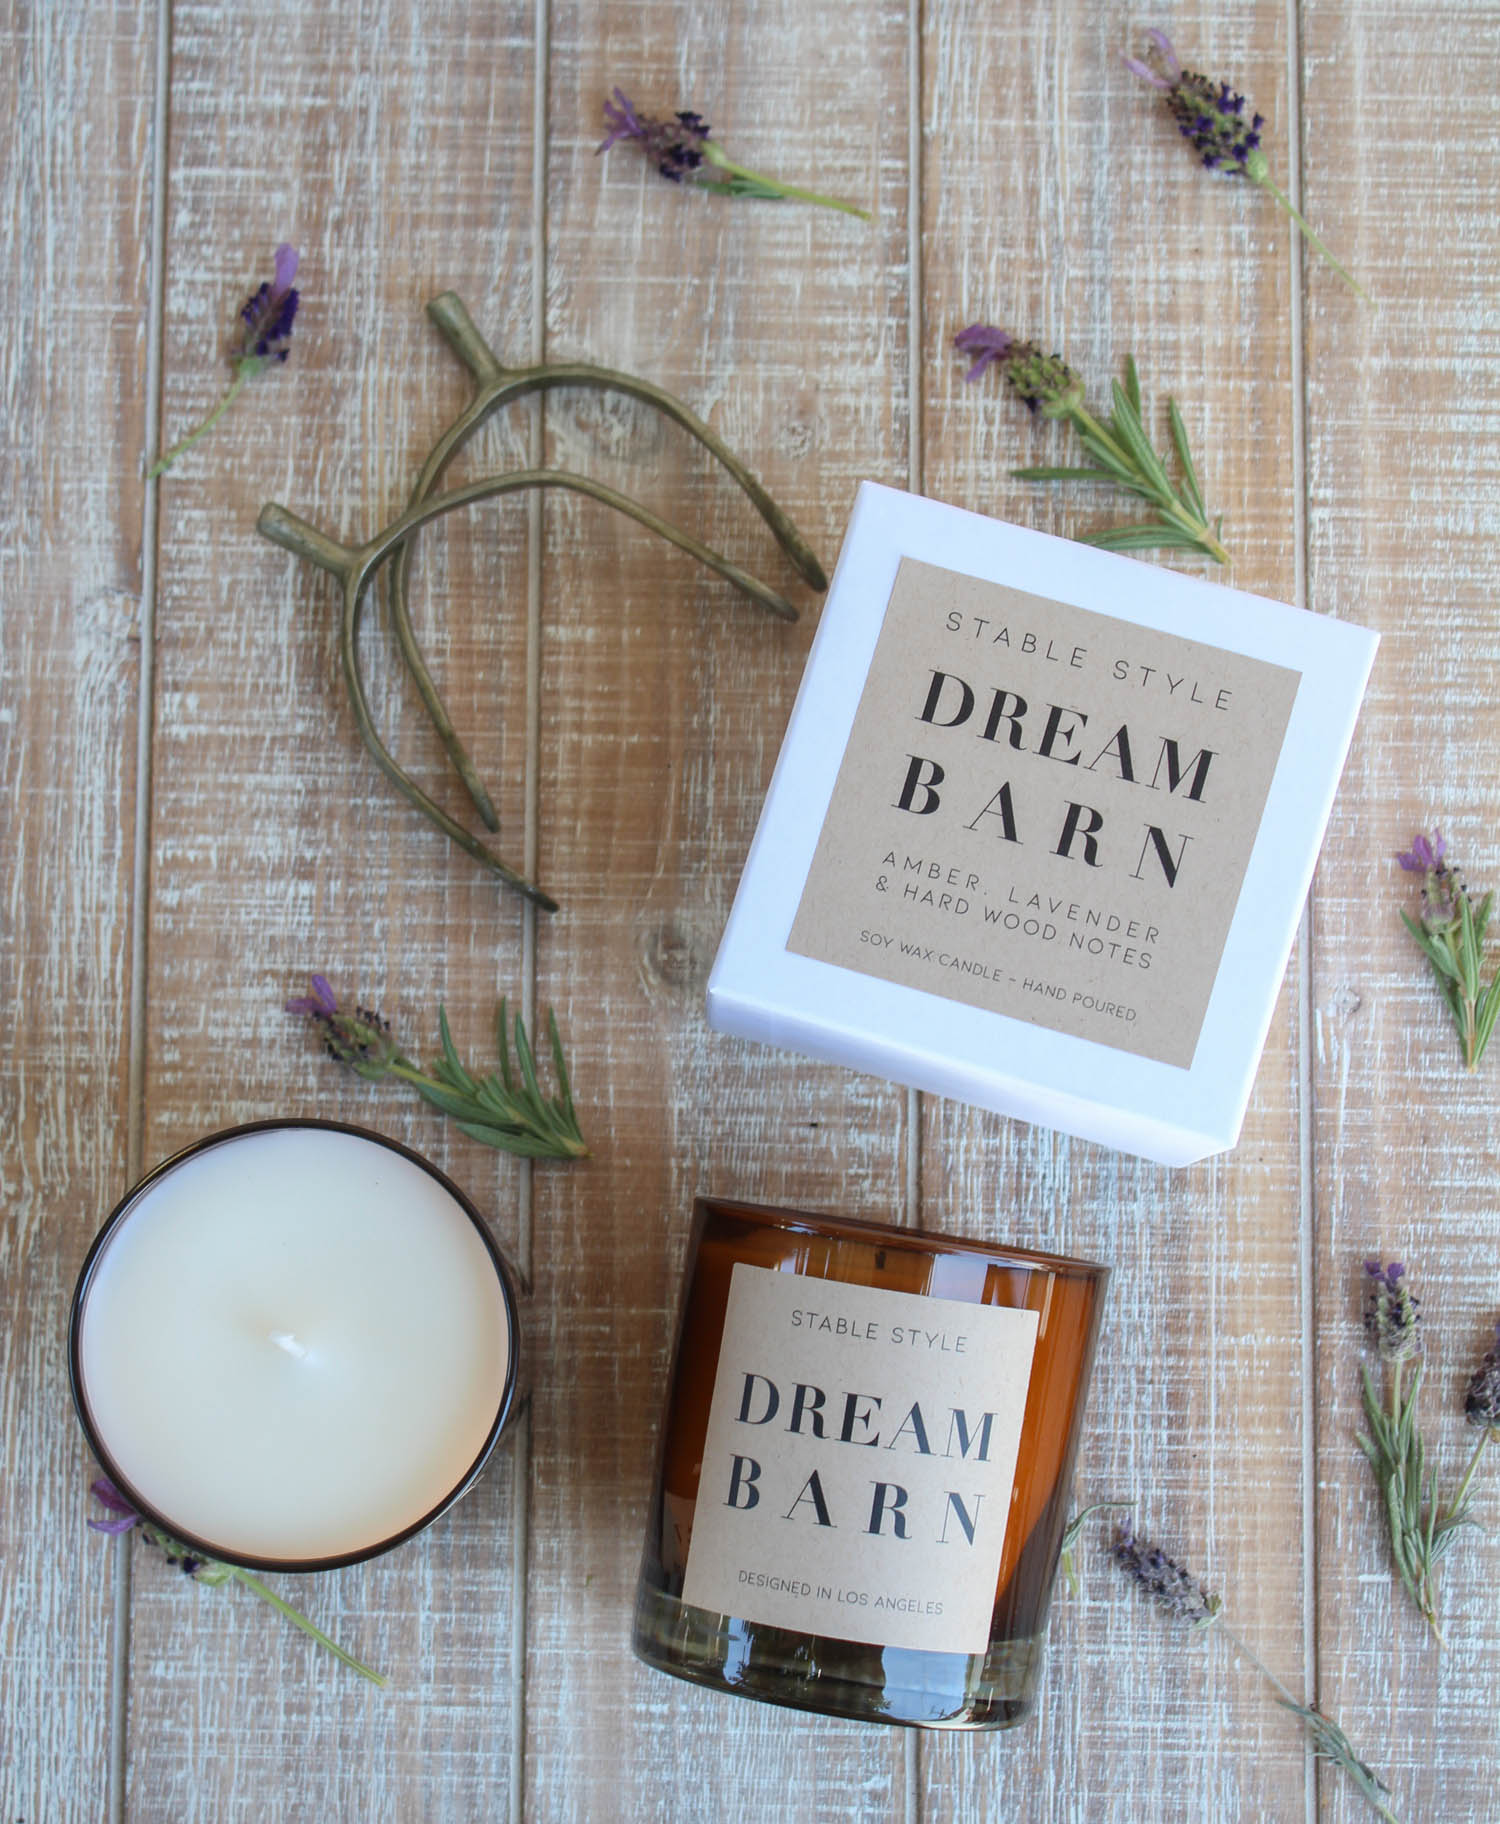 Dream Barn Scented Candle by Stable Style